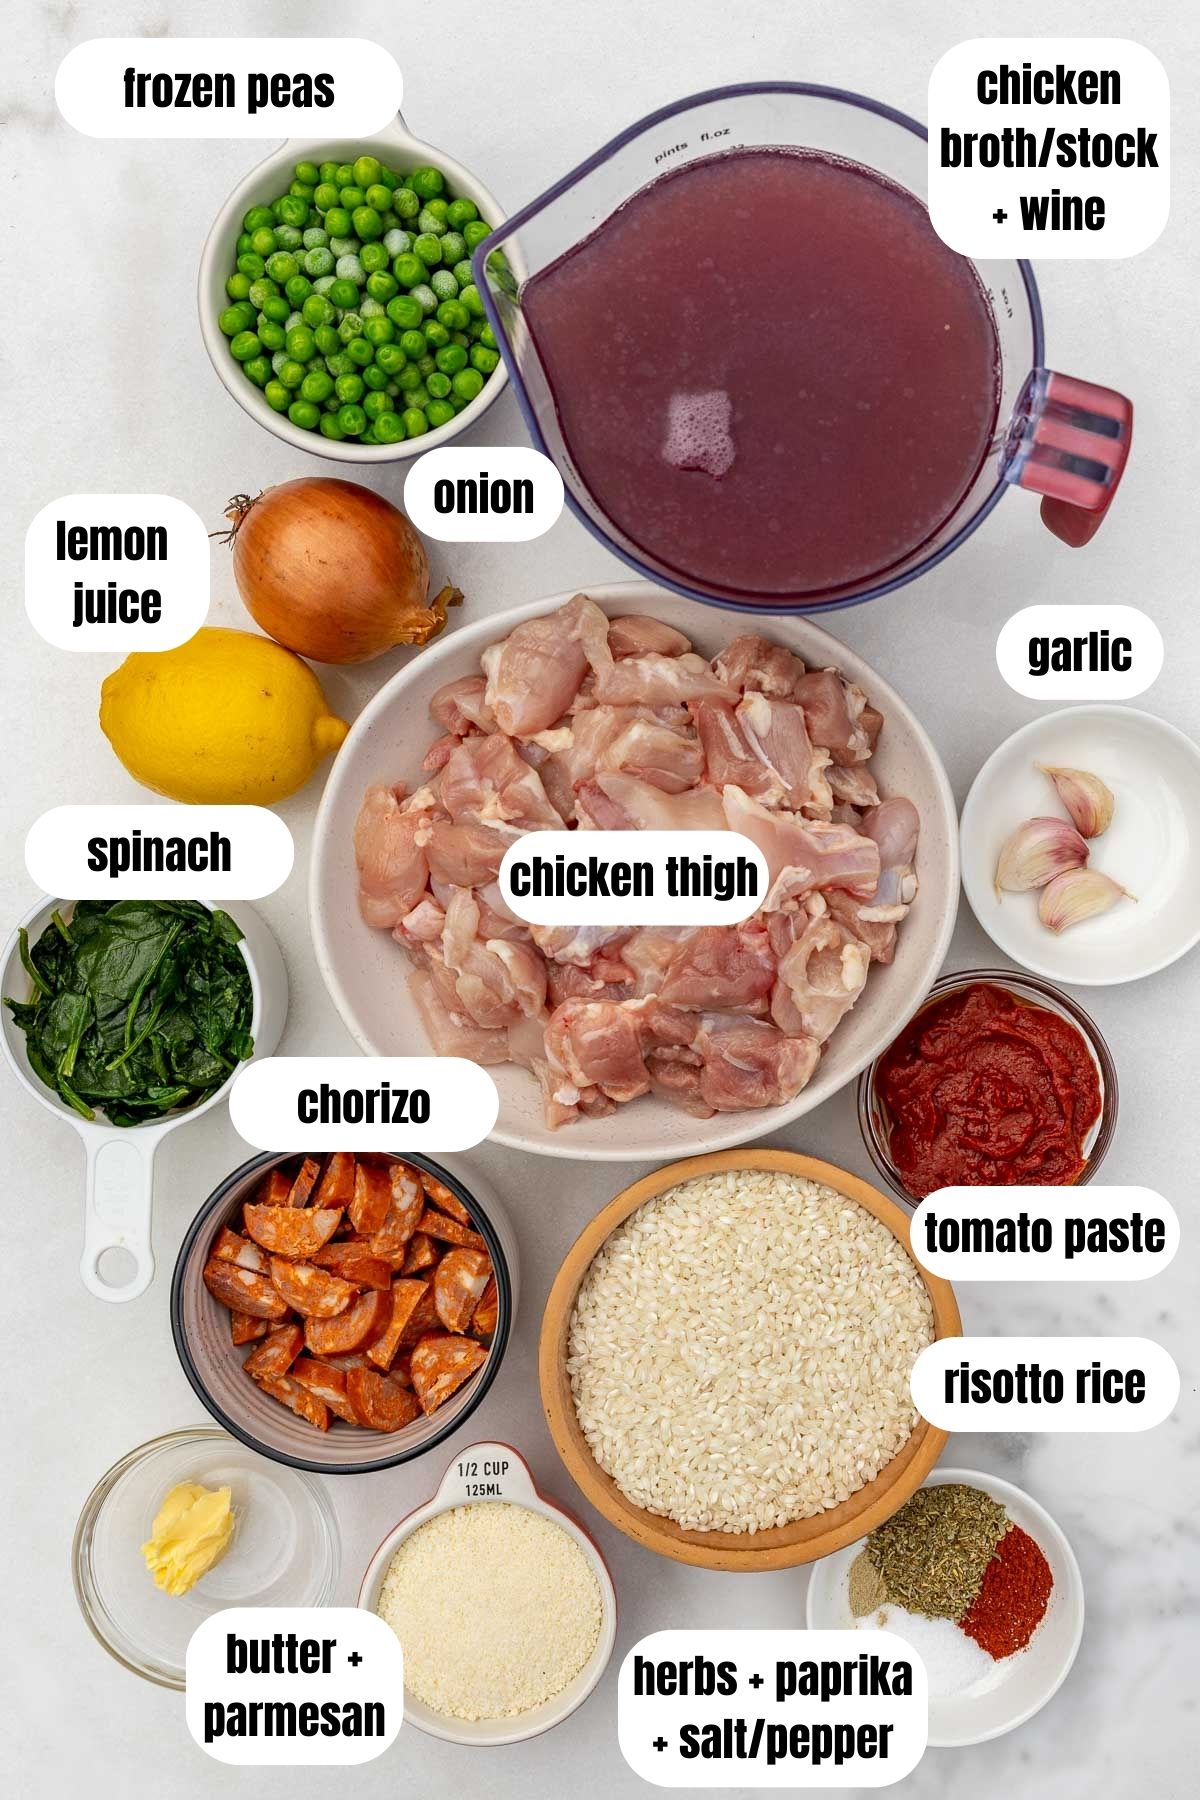 Overhead of all the ingredients for a chicken chorizo risotto including risotto rice, chicken broth, butter, parmesan cheese, herbs and spices, tomato paste, chicken thigh, spinach, garlic, onion, lemon juice and frozen peas.